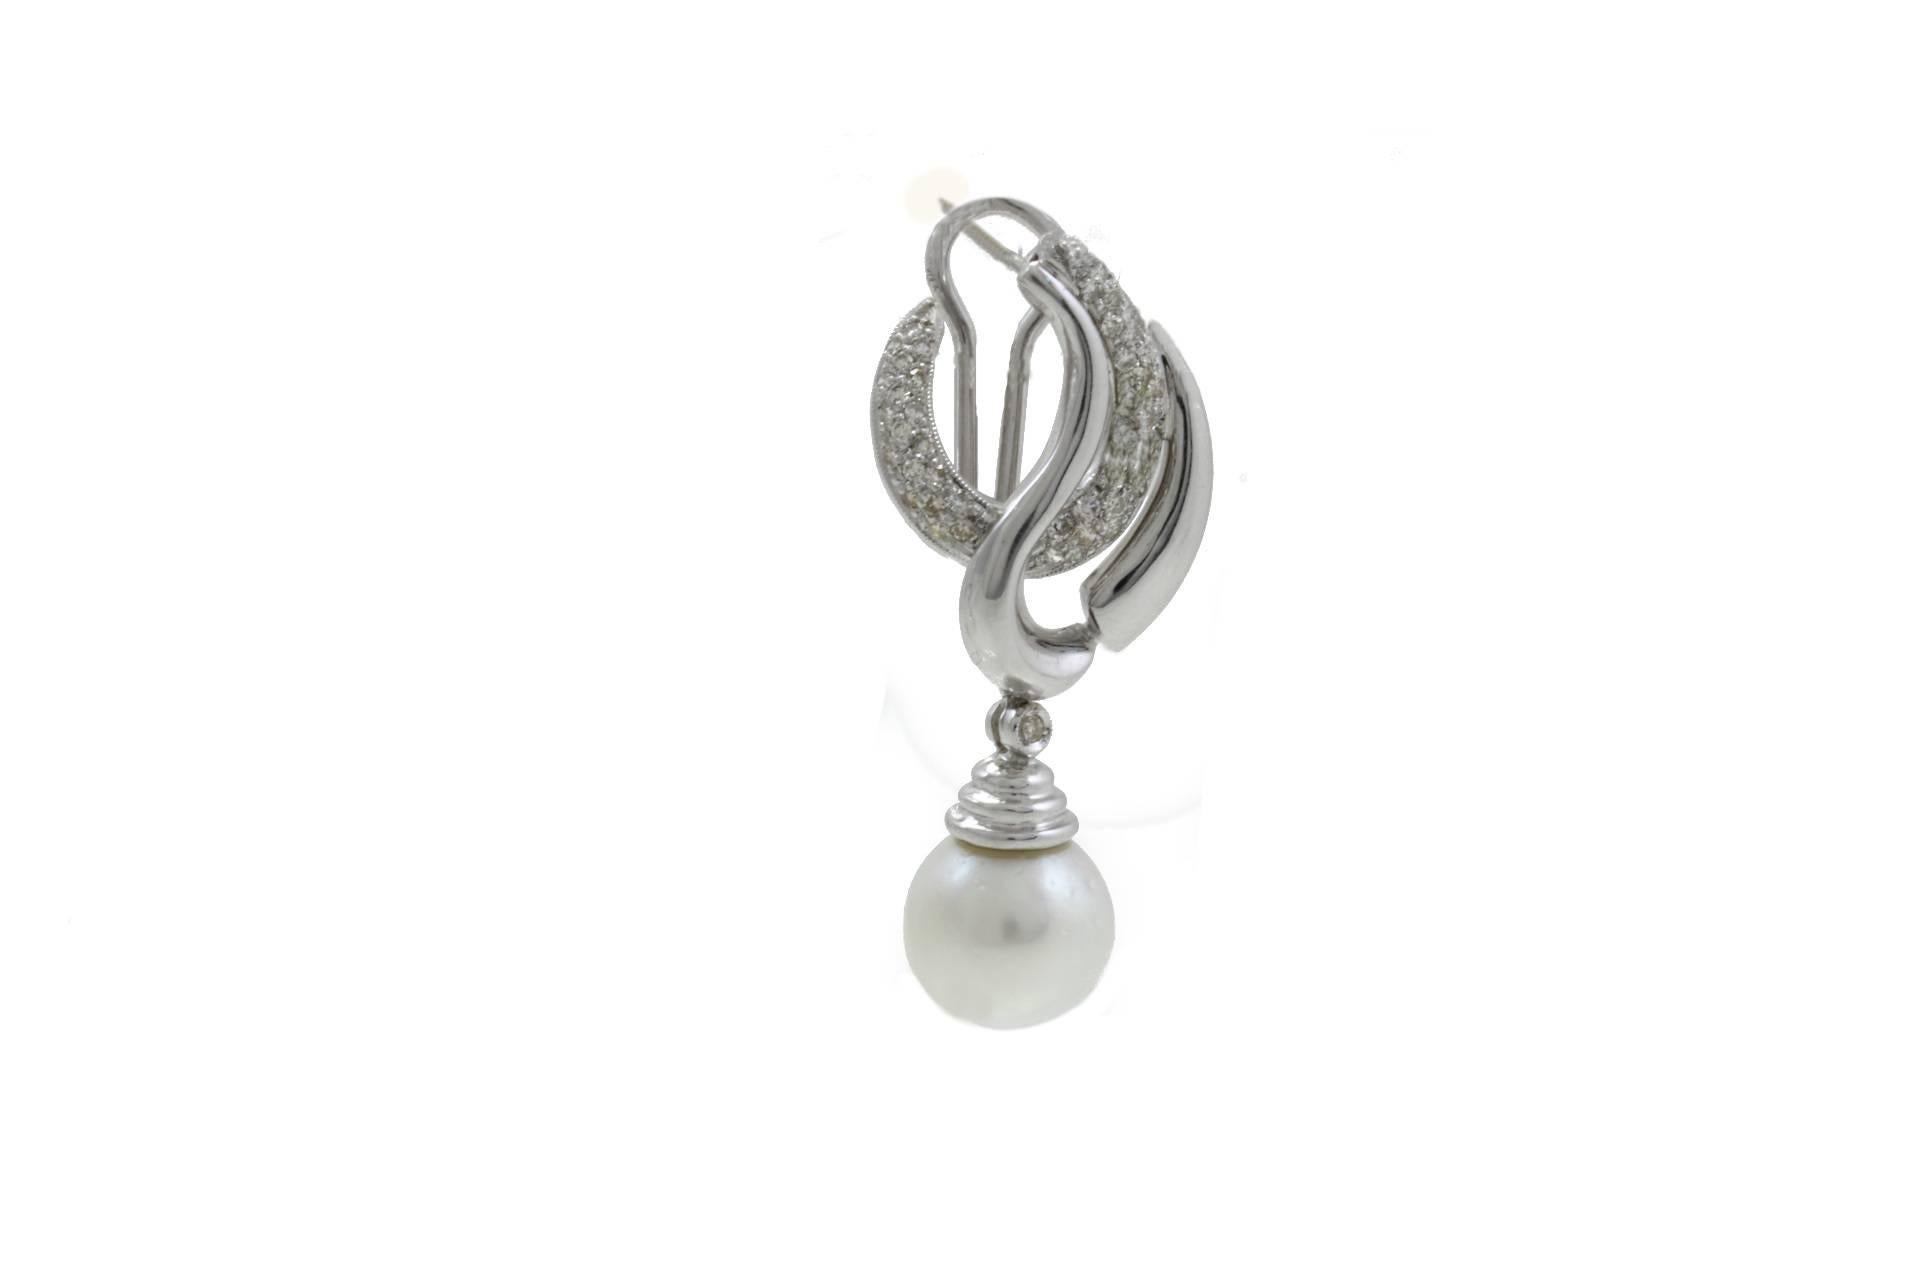 Dangle earrings in 18Kt white gold with a design that's alternating one side of diamonds and one side of white gold. On the bottom there are two pearls that's complete them. 

Diamonds 1.22 Kt
Pearls 29.62 gr diameter 12/13mm
Tot weight 22.7 gr

Rf.